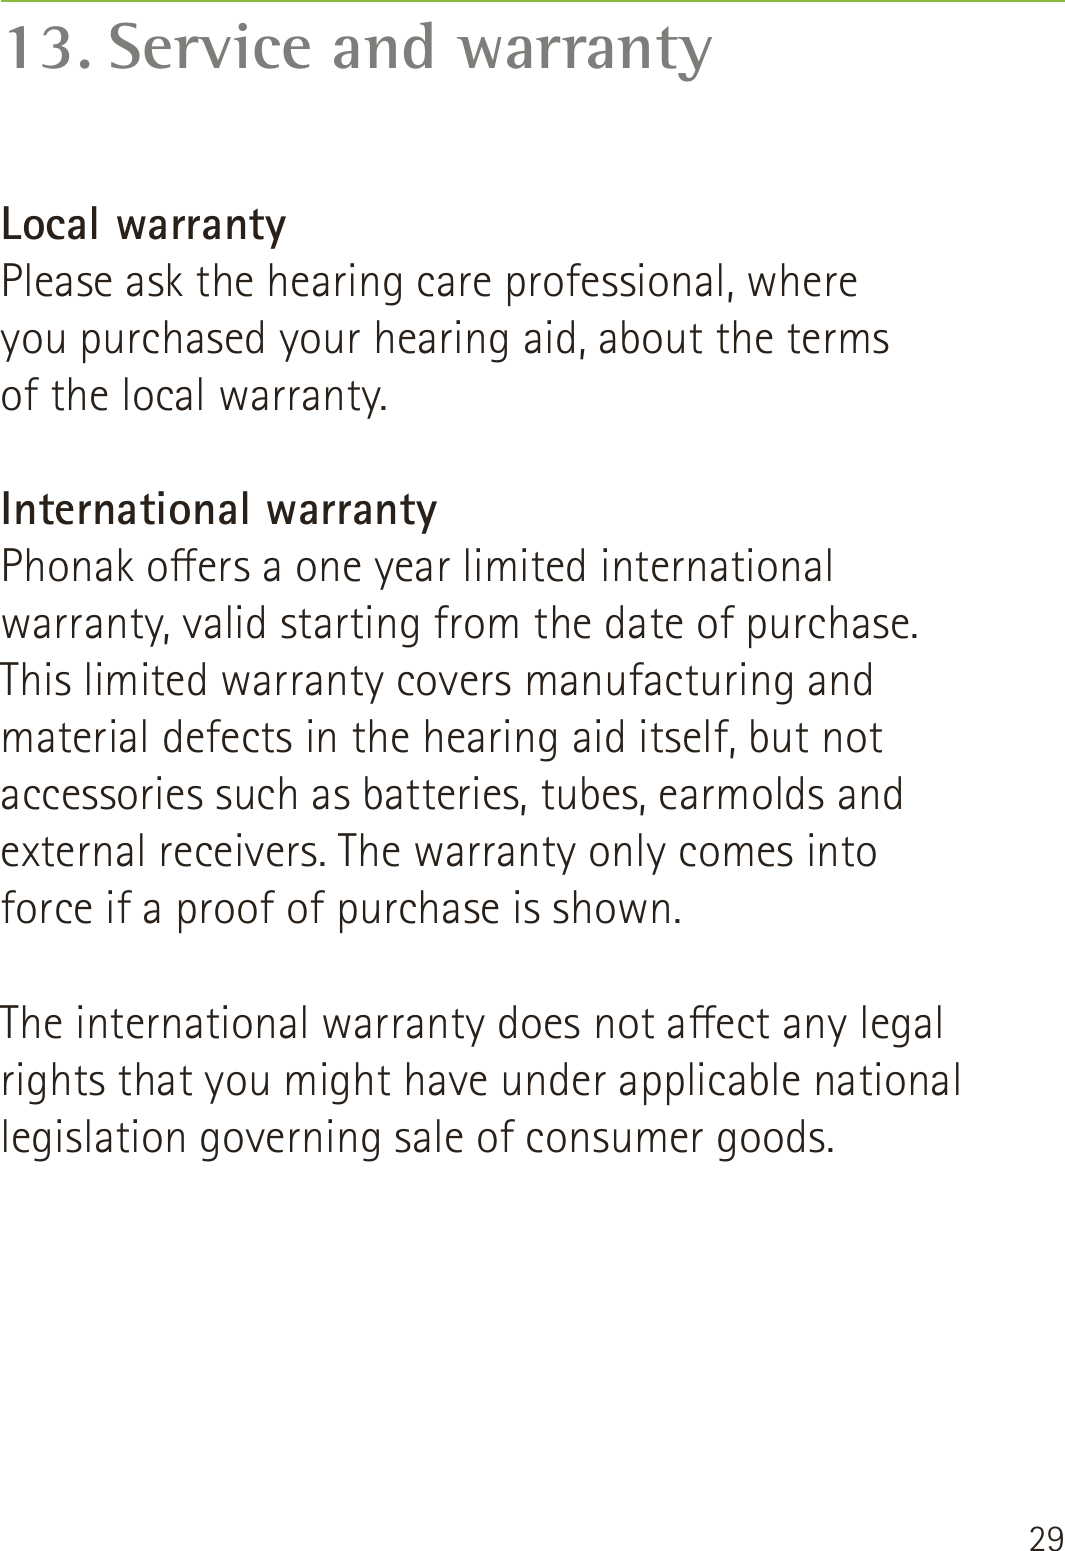 2913. Service and warrantyLocal warrantyPlease ask the hearing care professional, where  you purchased your hearing aid, about the terms  of the local warranty.International warrantyPhonak oers a one year limited international warranty, valid starting from the date of purchase. This limited warranty covers manufacturing and material defects in the hearing aid itself, but not accessories such as batteries, tubes, earmolds and external receivers. The warranty only comes into force if a proof of purchase is shown.The international warranty does not aect any legal rights that you might have under applicable national legislation governing sale of consumer goods.